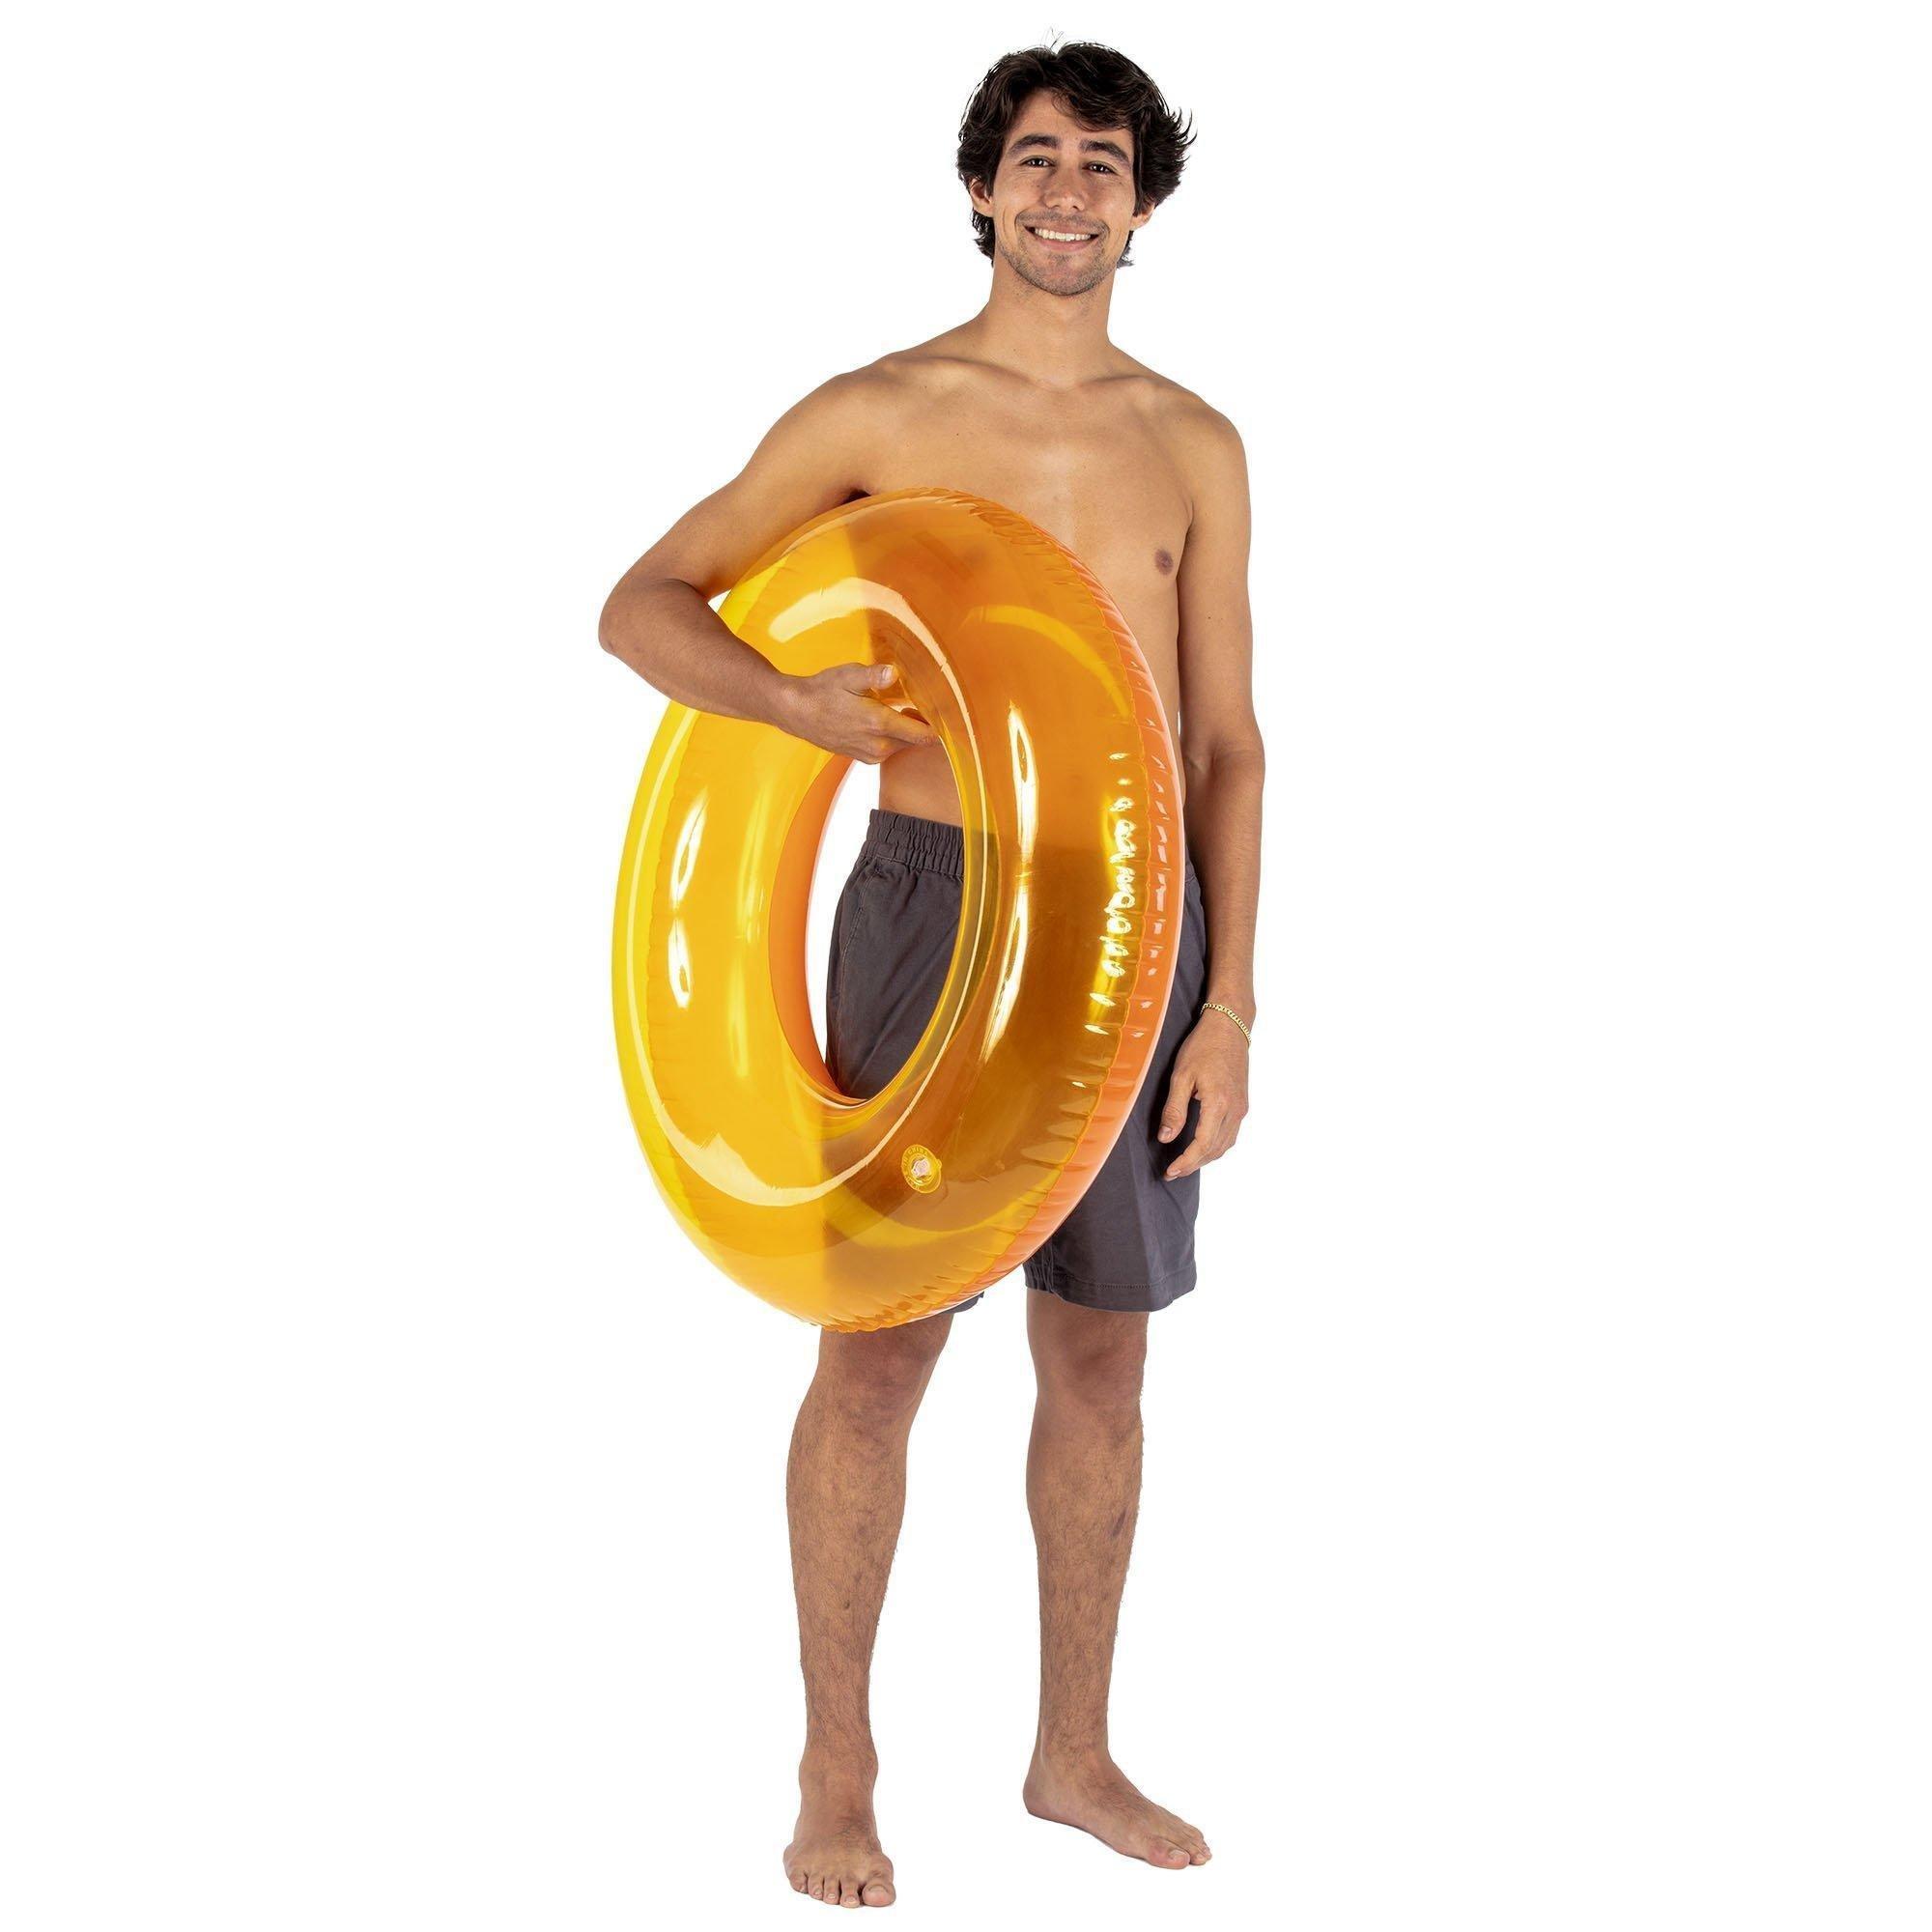 Summer Pool Party Toy Kit